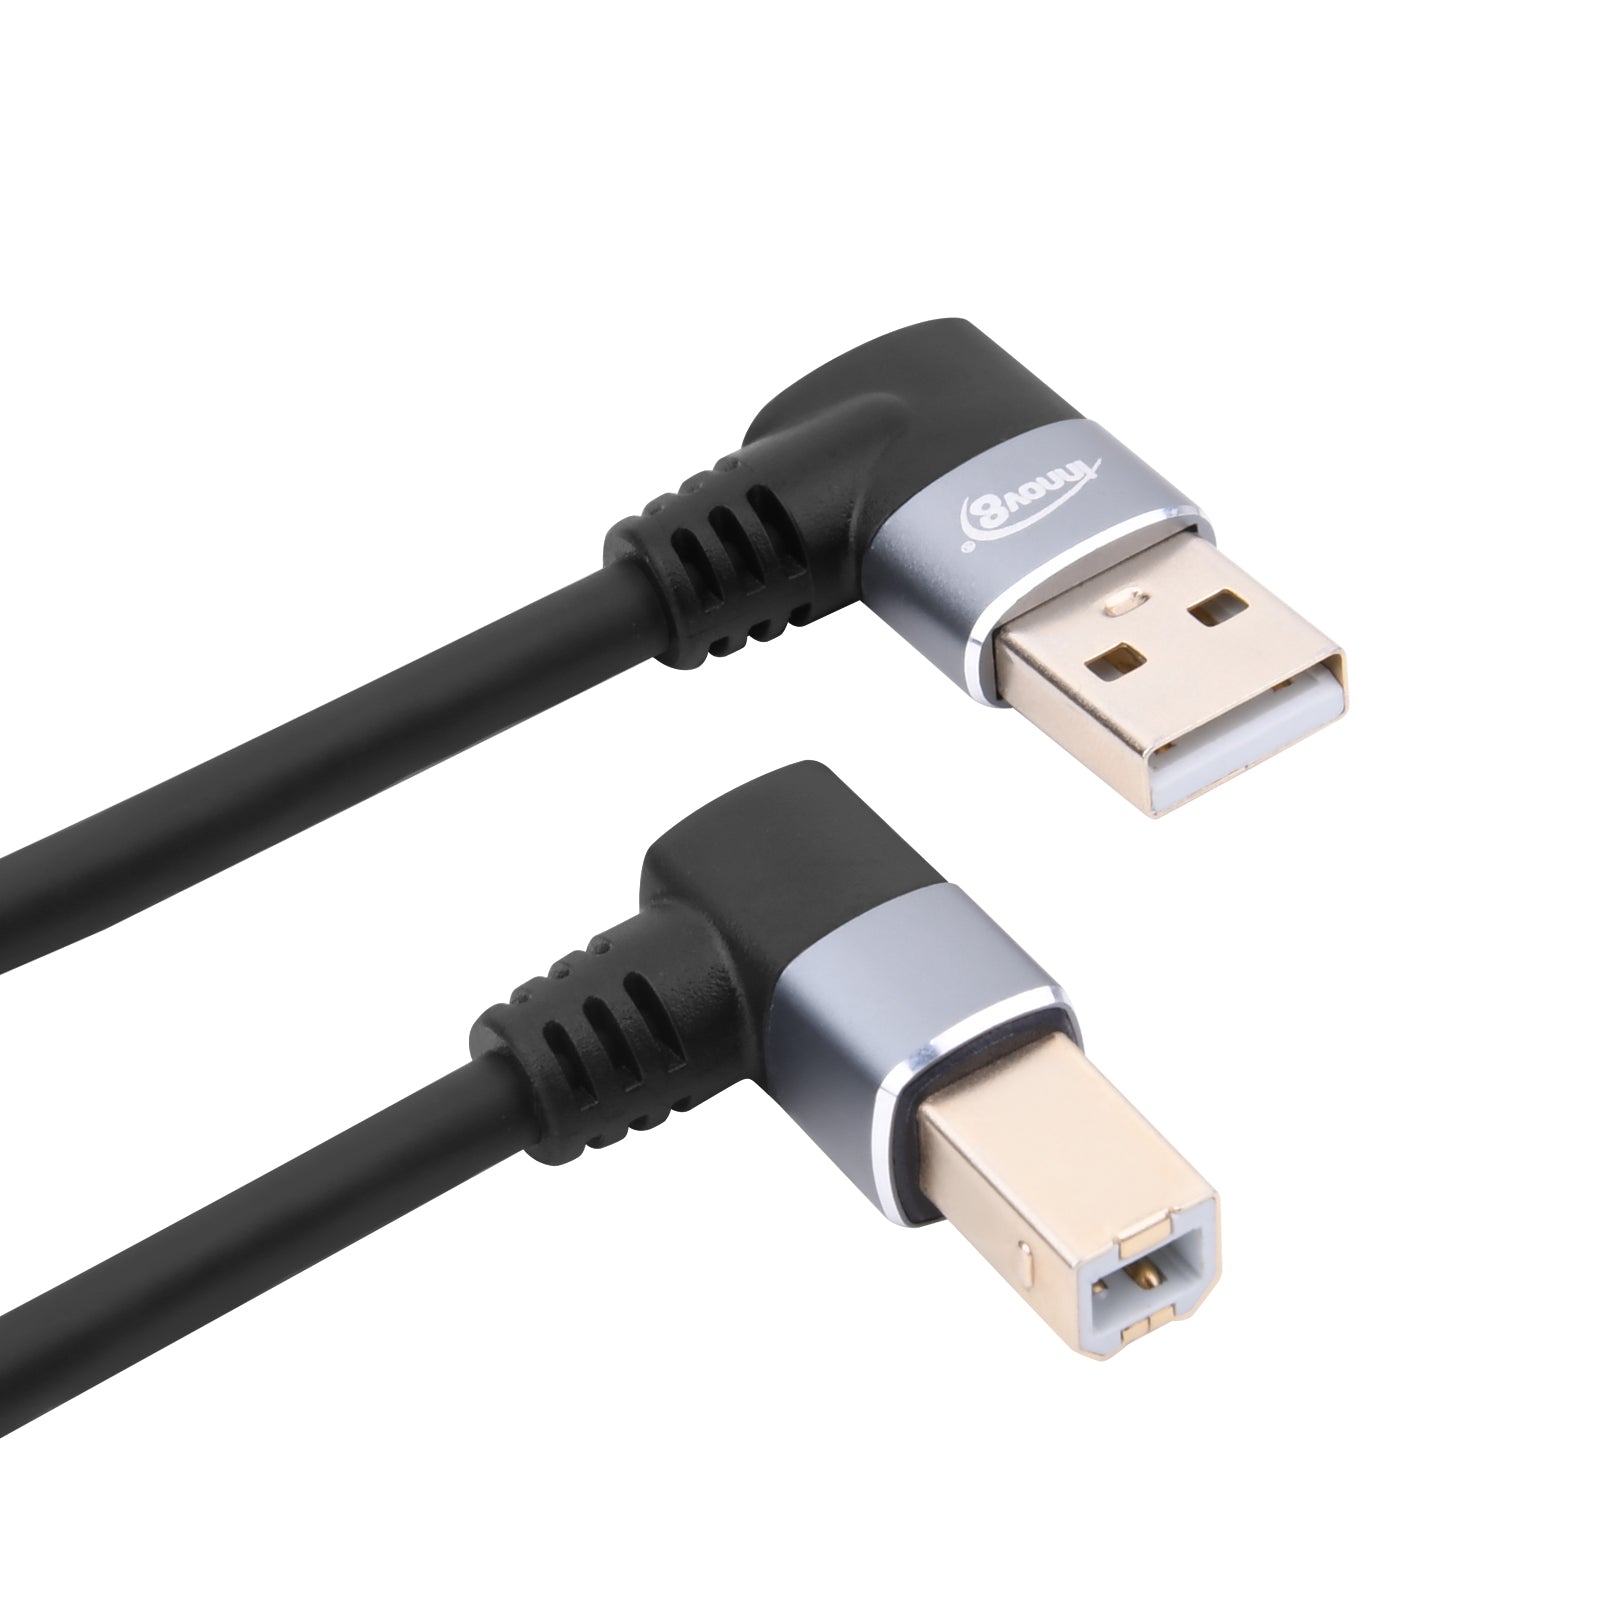 USB-A 2.0 A-Male to USB-B Male Angled Printer Cable with Gold Plated Connector